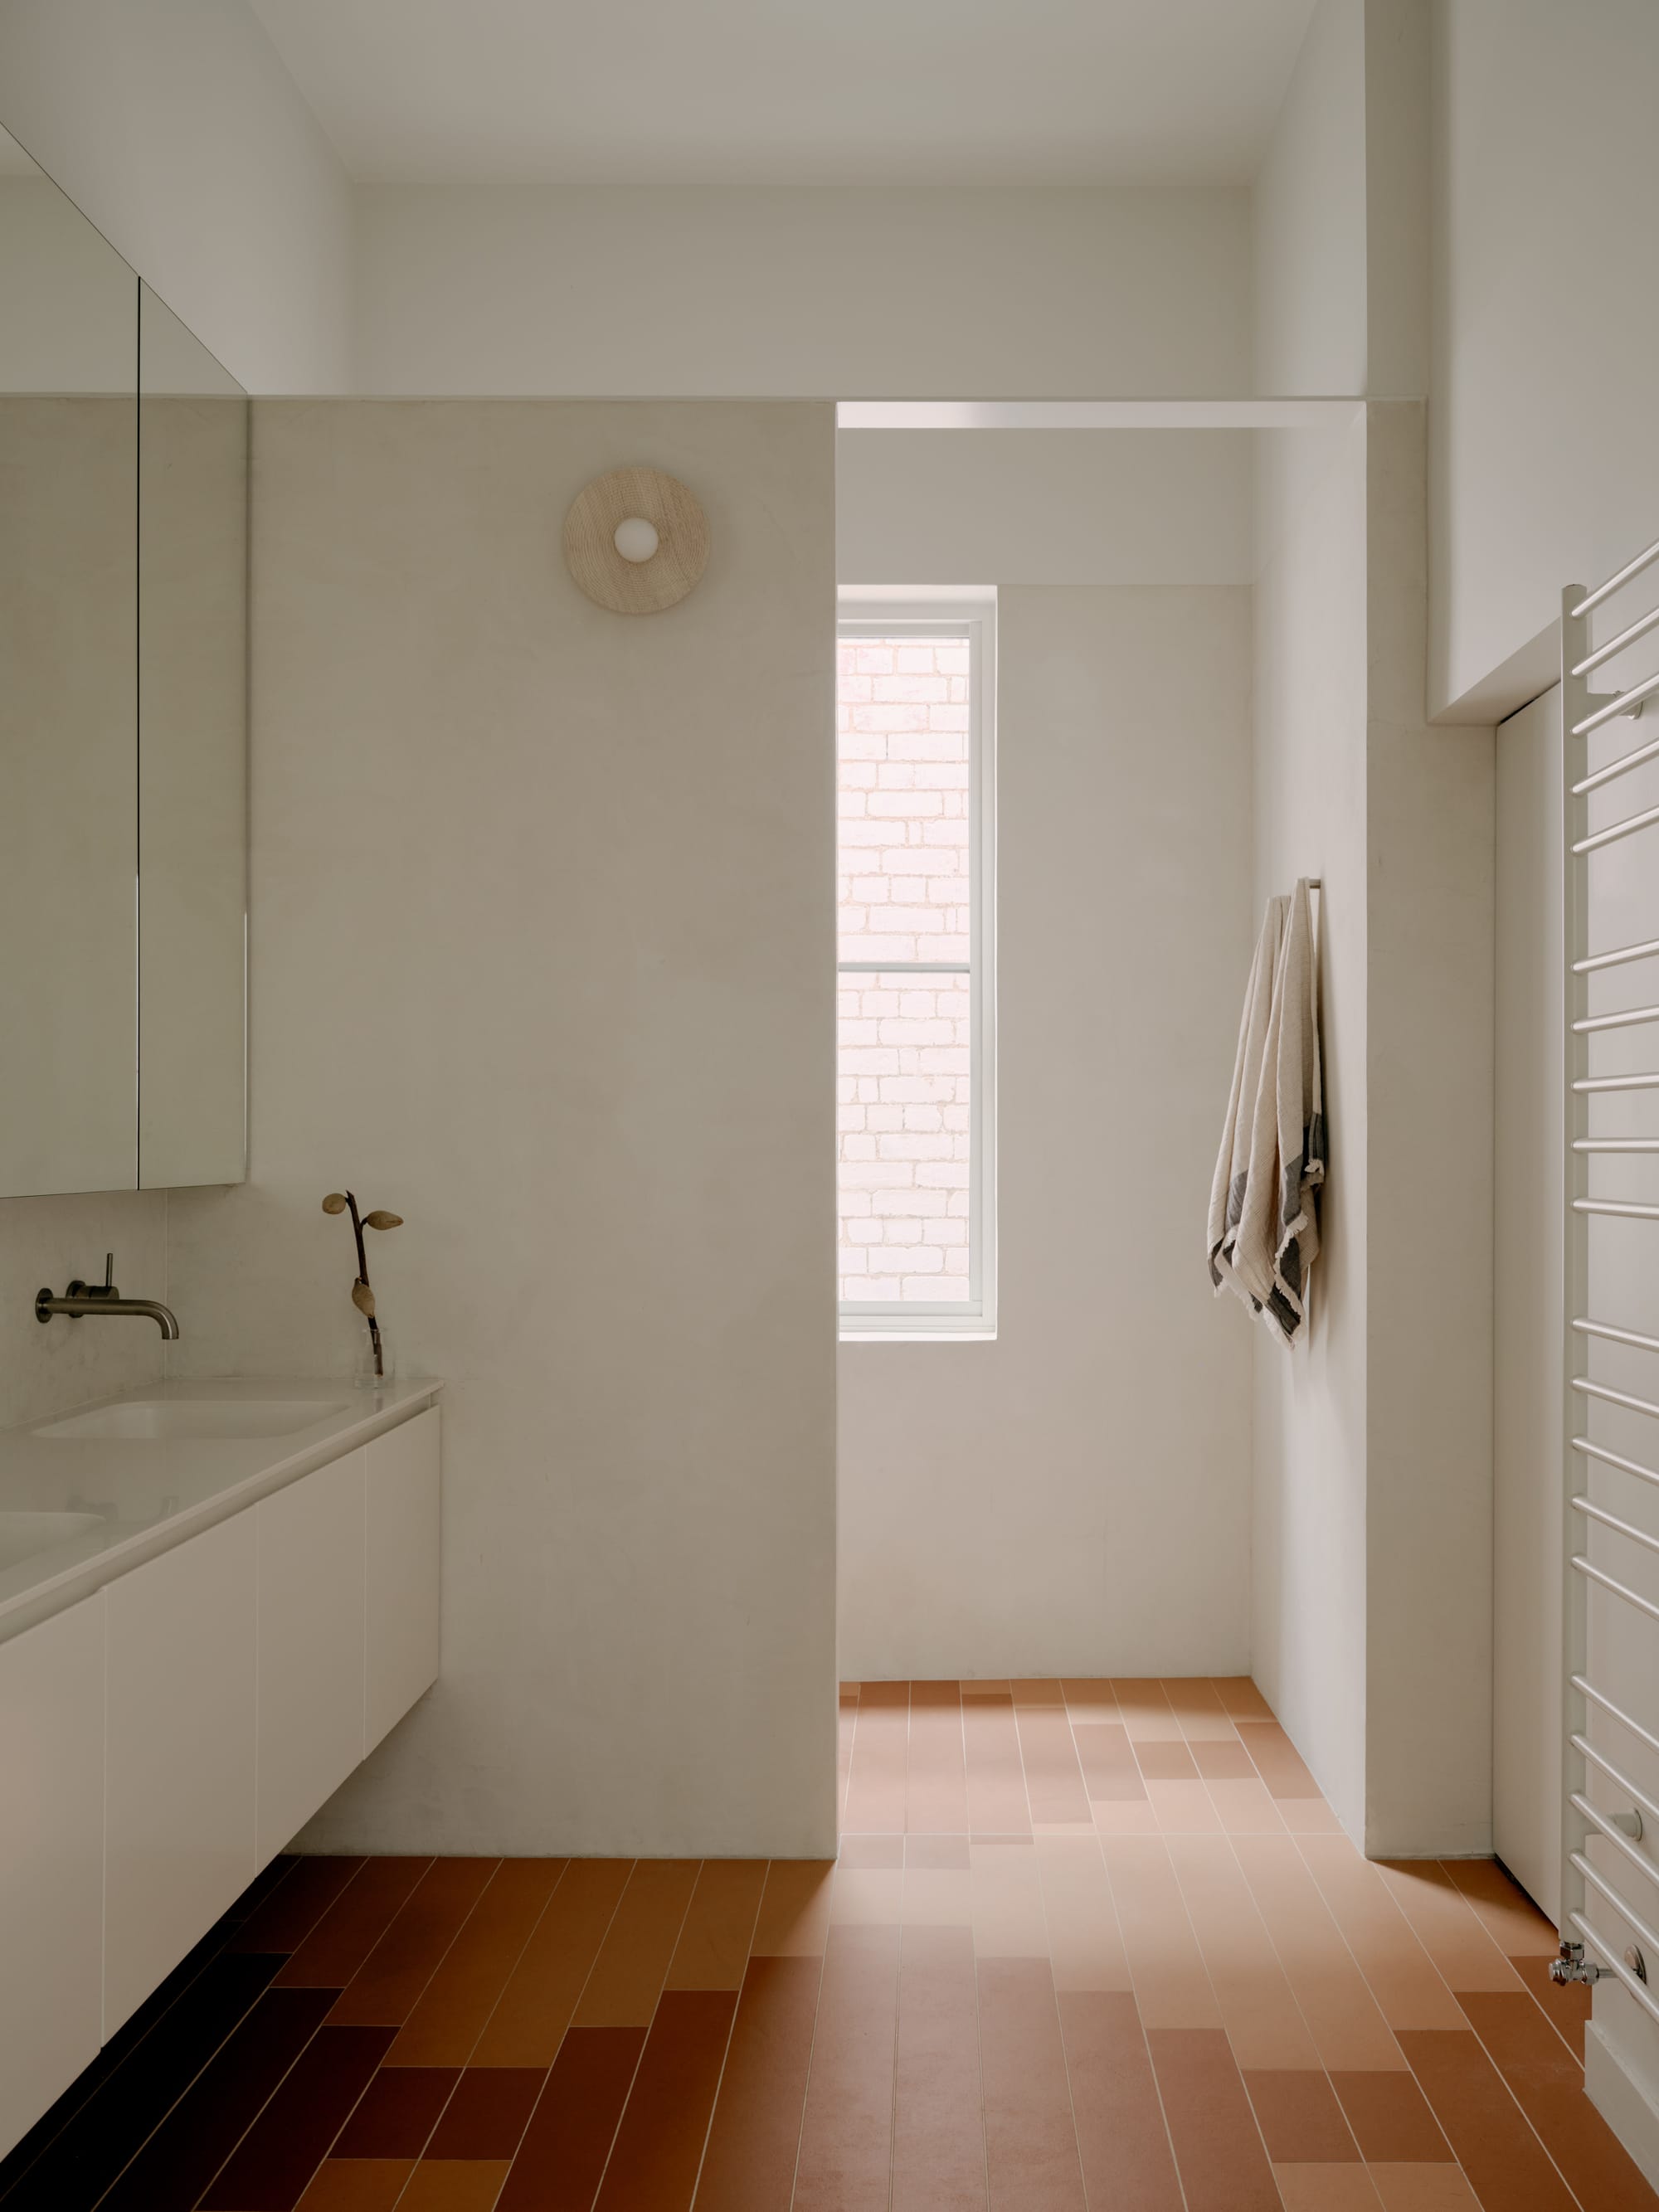 Corymbia by Karen Abernethy Architects. Photography by Tom Ross. Bathroom with patterned terracotta floor tiles and white plaster walls. White floating basin and wall mirror. 